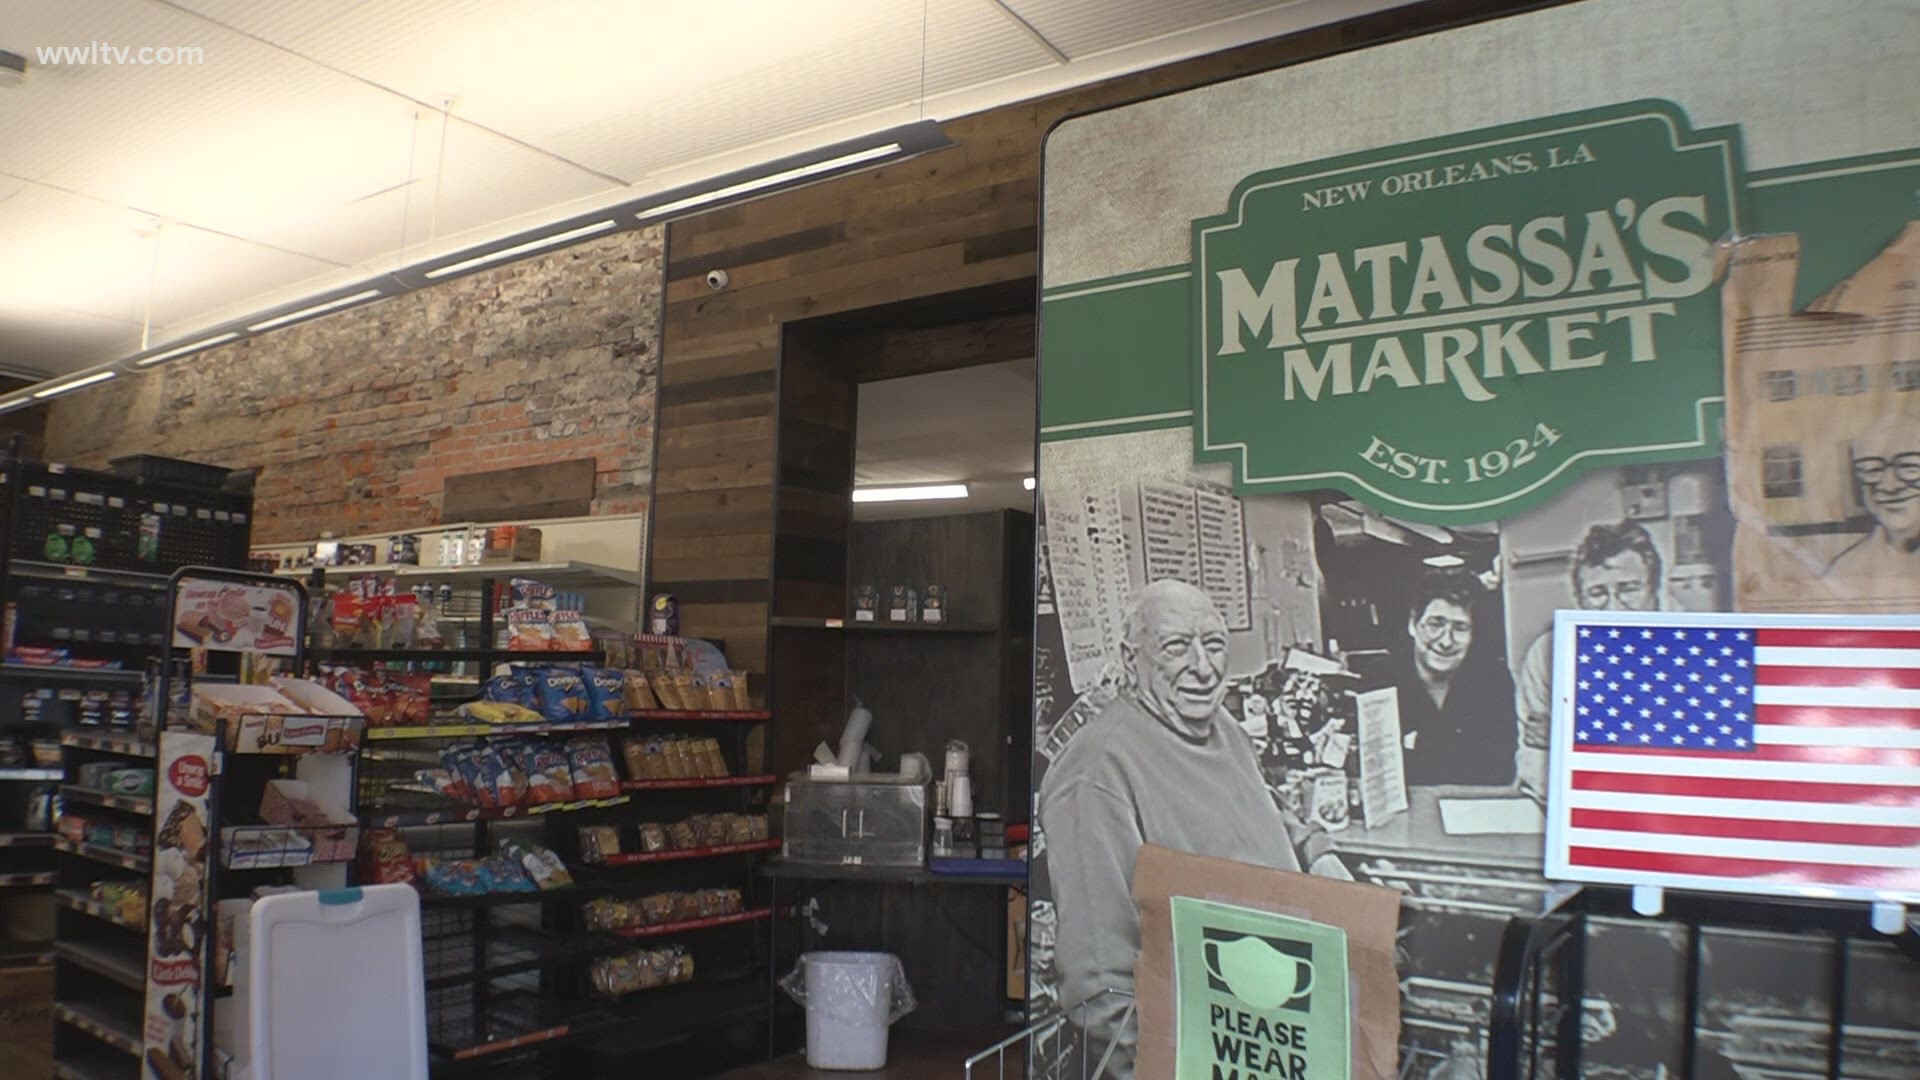 Matassa's Market is sadly closing its doors after 100 years of serving the city of New Orleans.